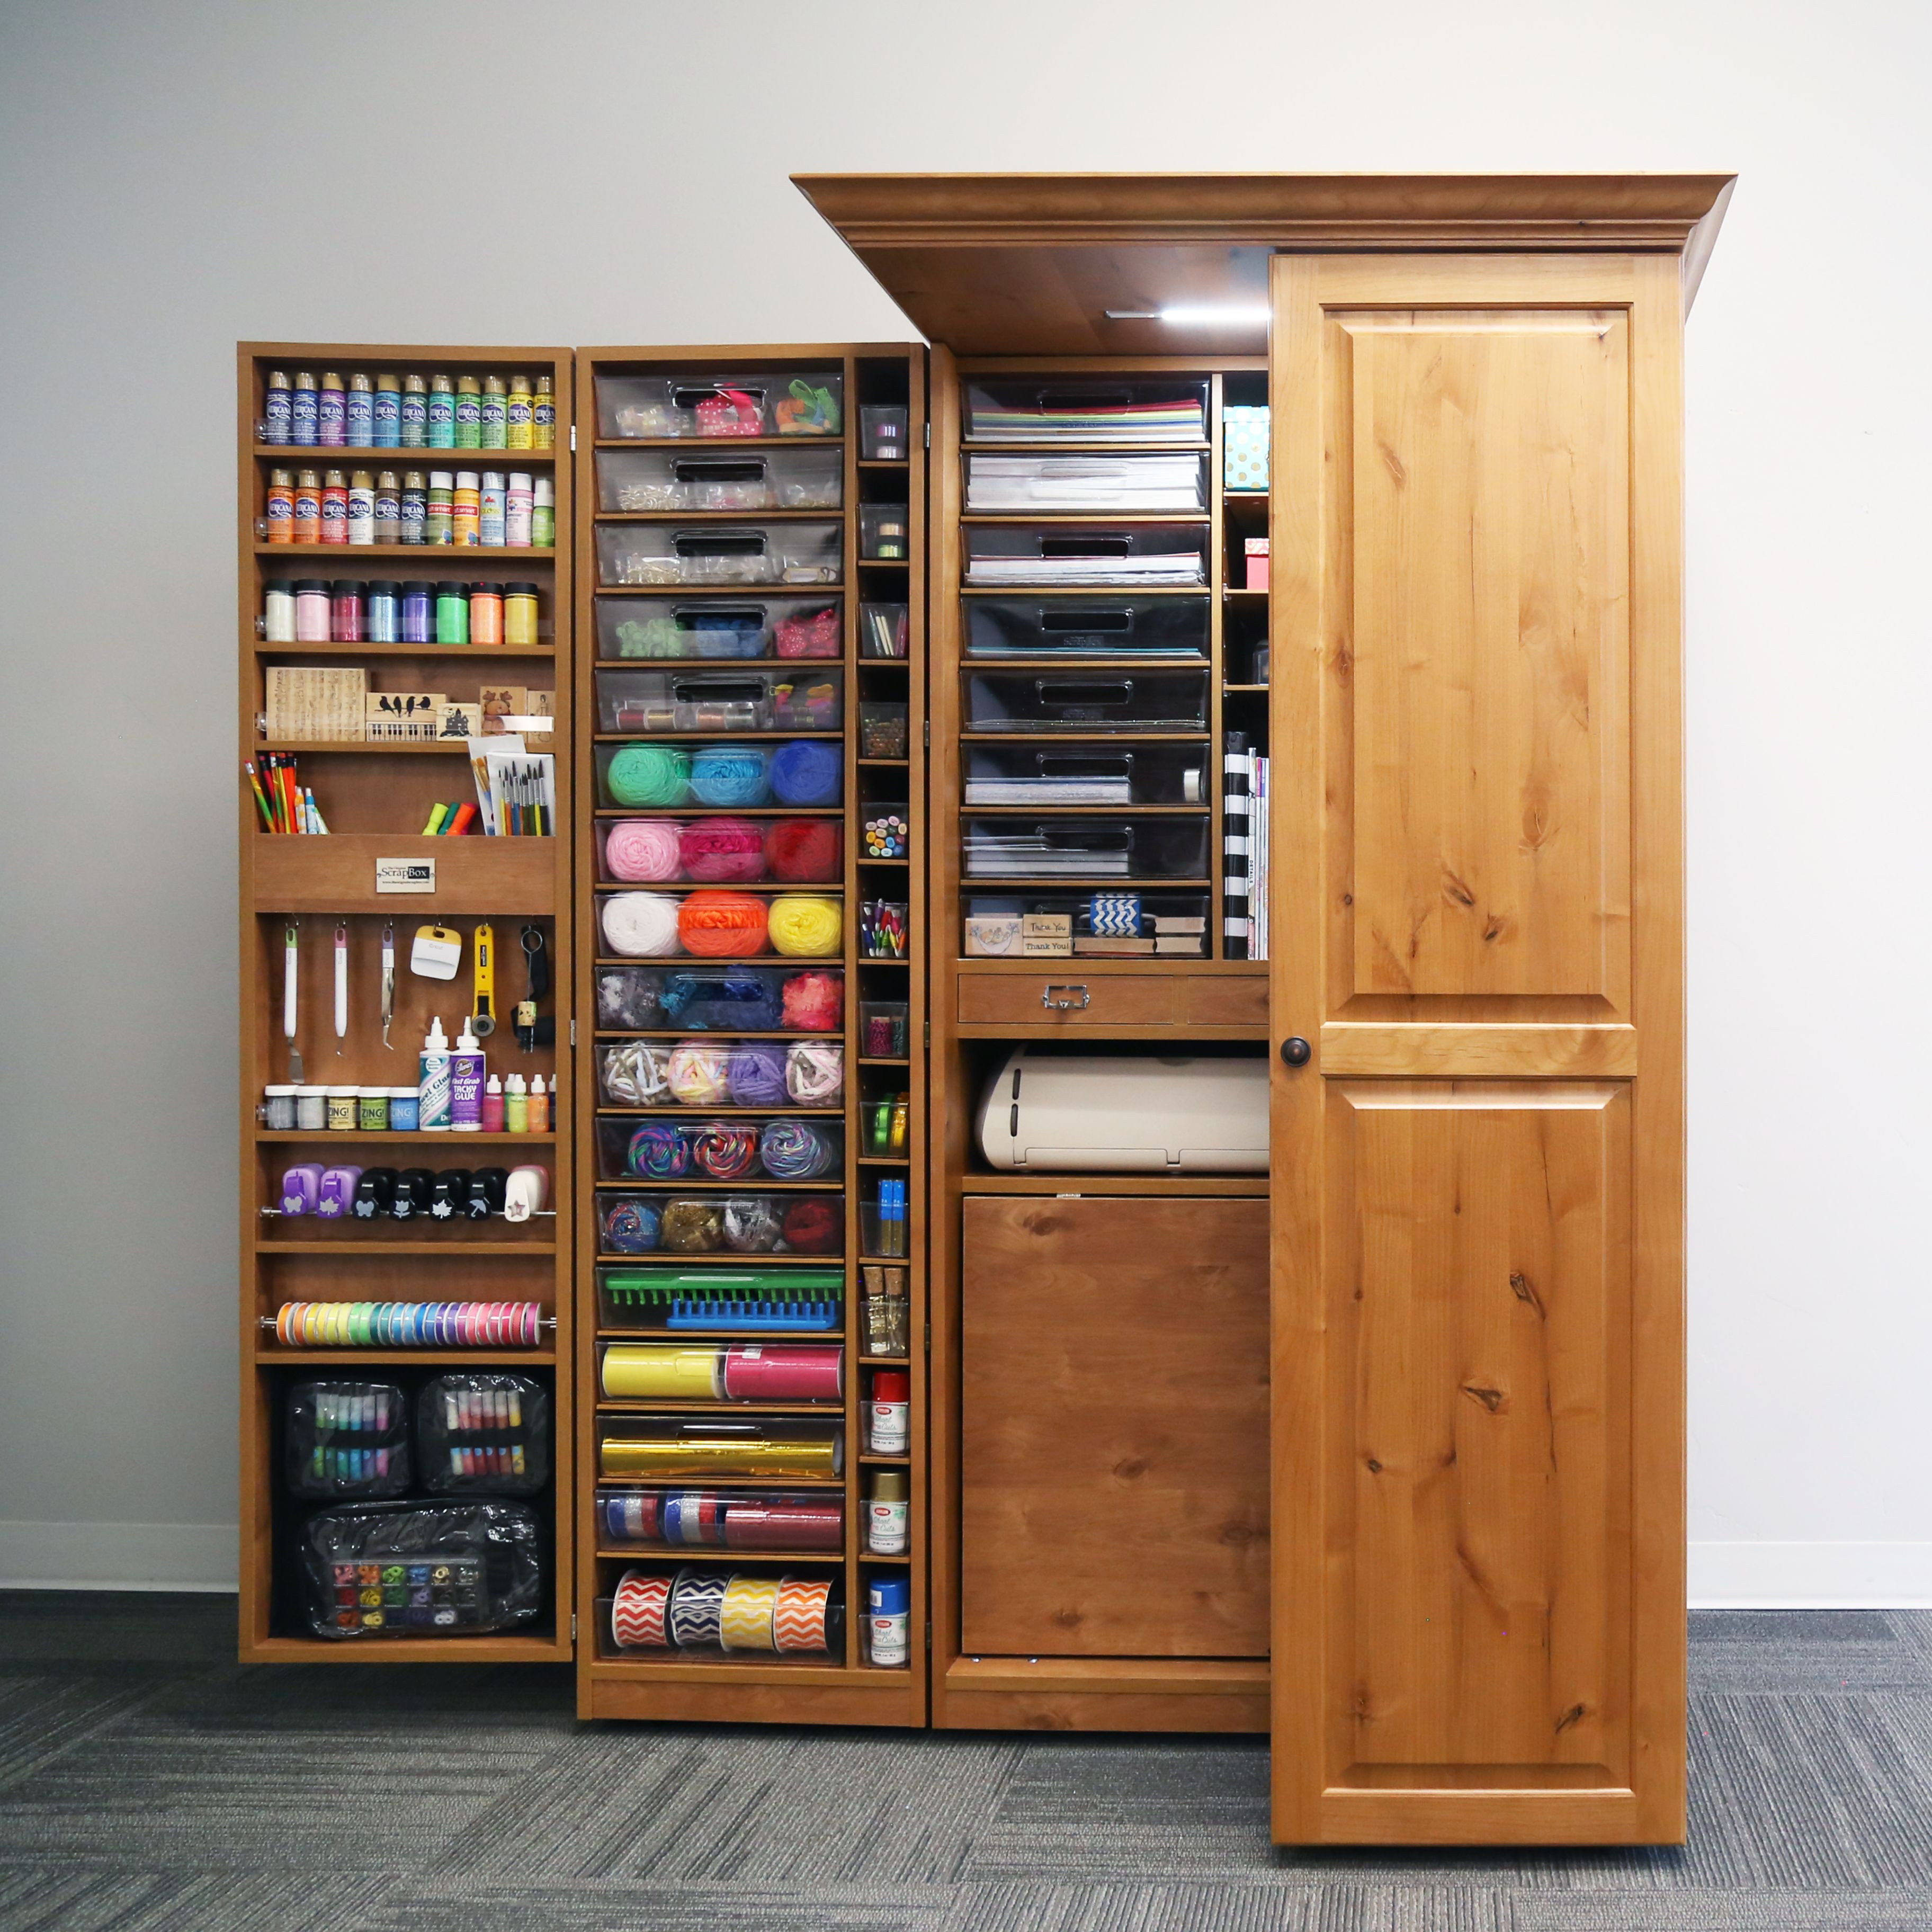 Craft Organization Cabinet
 Looking for craft storage options